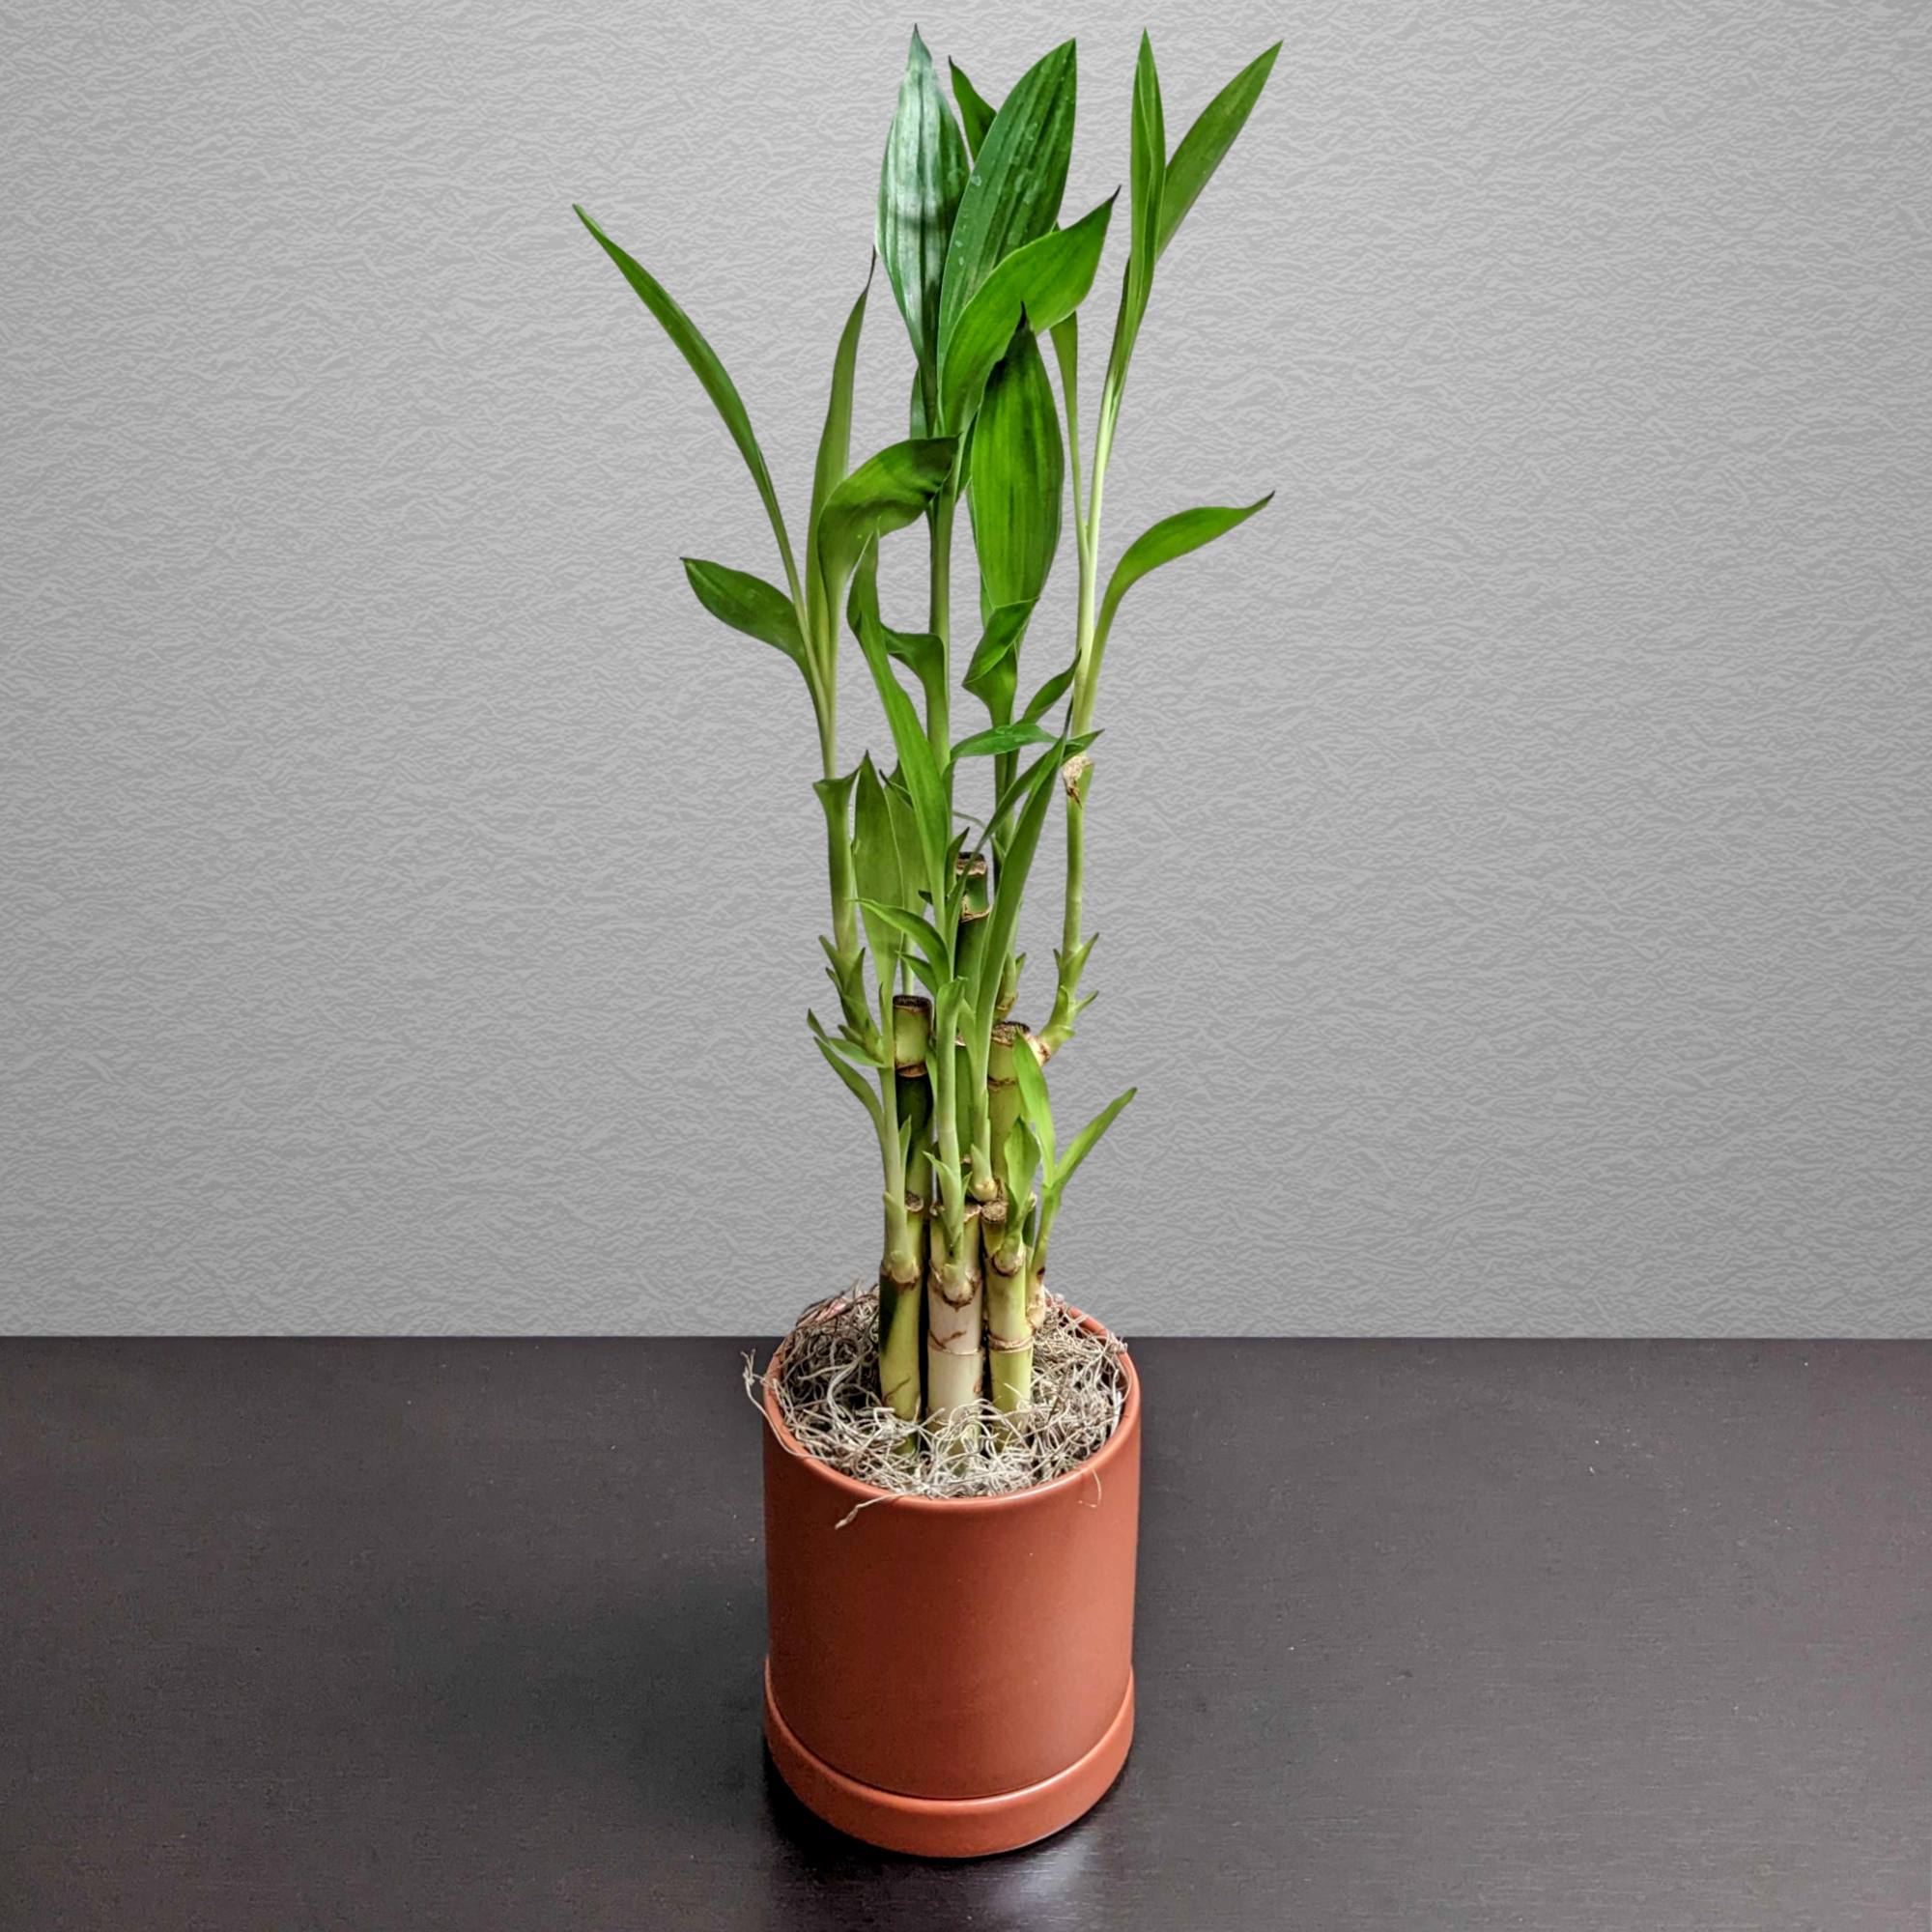 How to Make Lucky Bamboo Thrive: Insider Secrets for Fast Growth